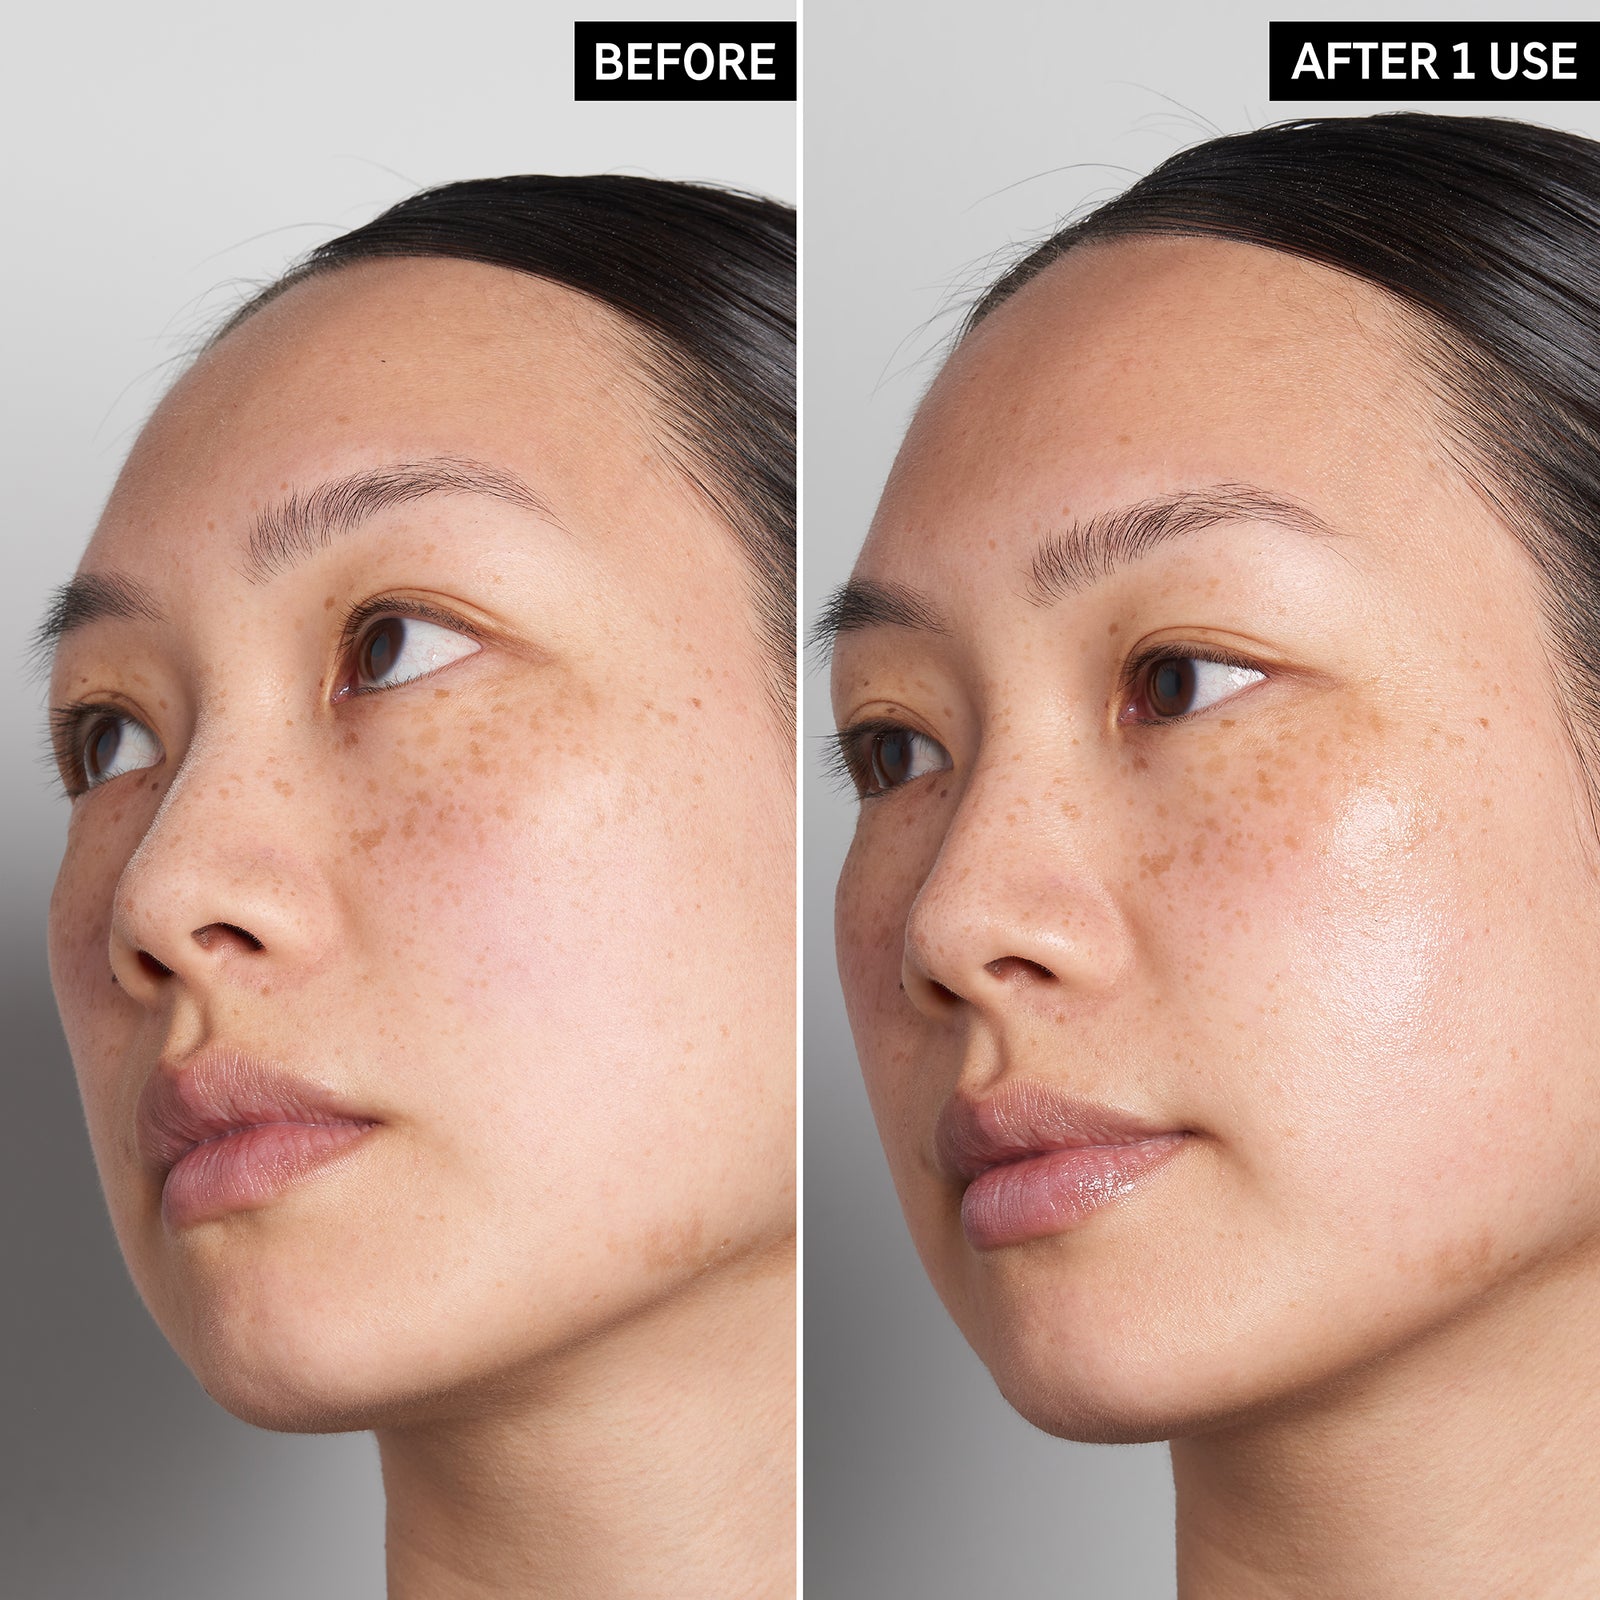 Two photos of a model's face next to eachother to show the before and after of using Hyaluronic Acid Serum